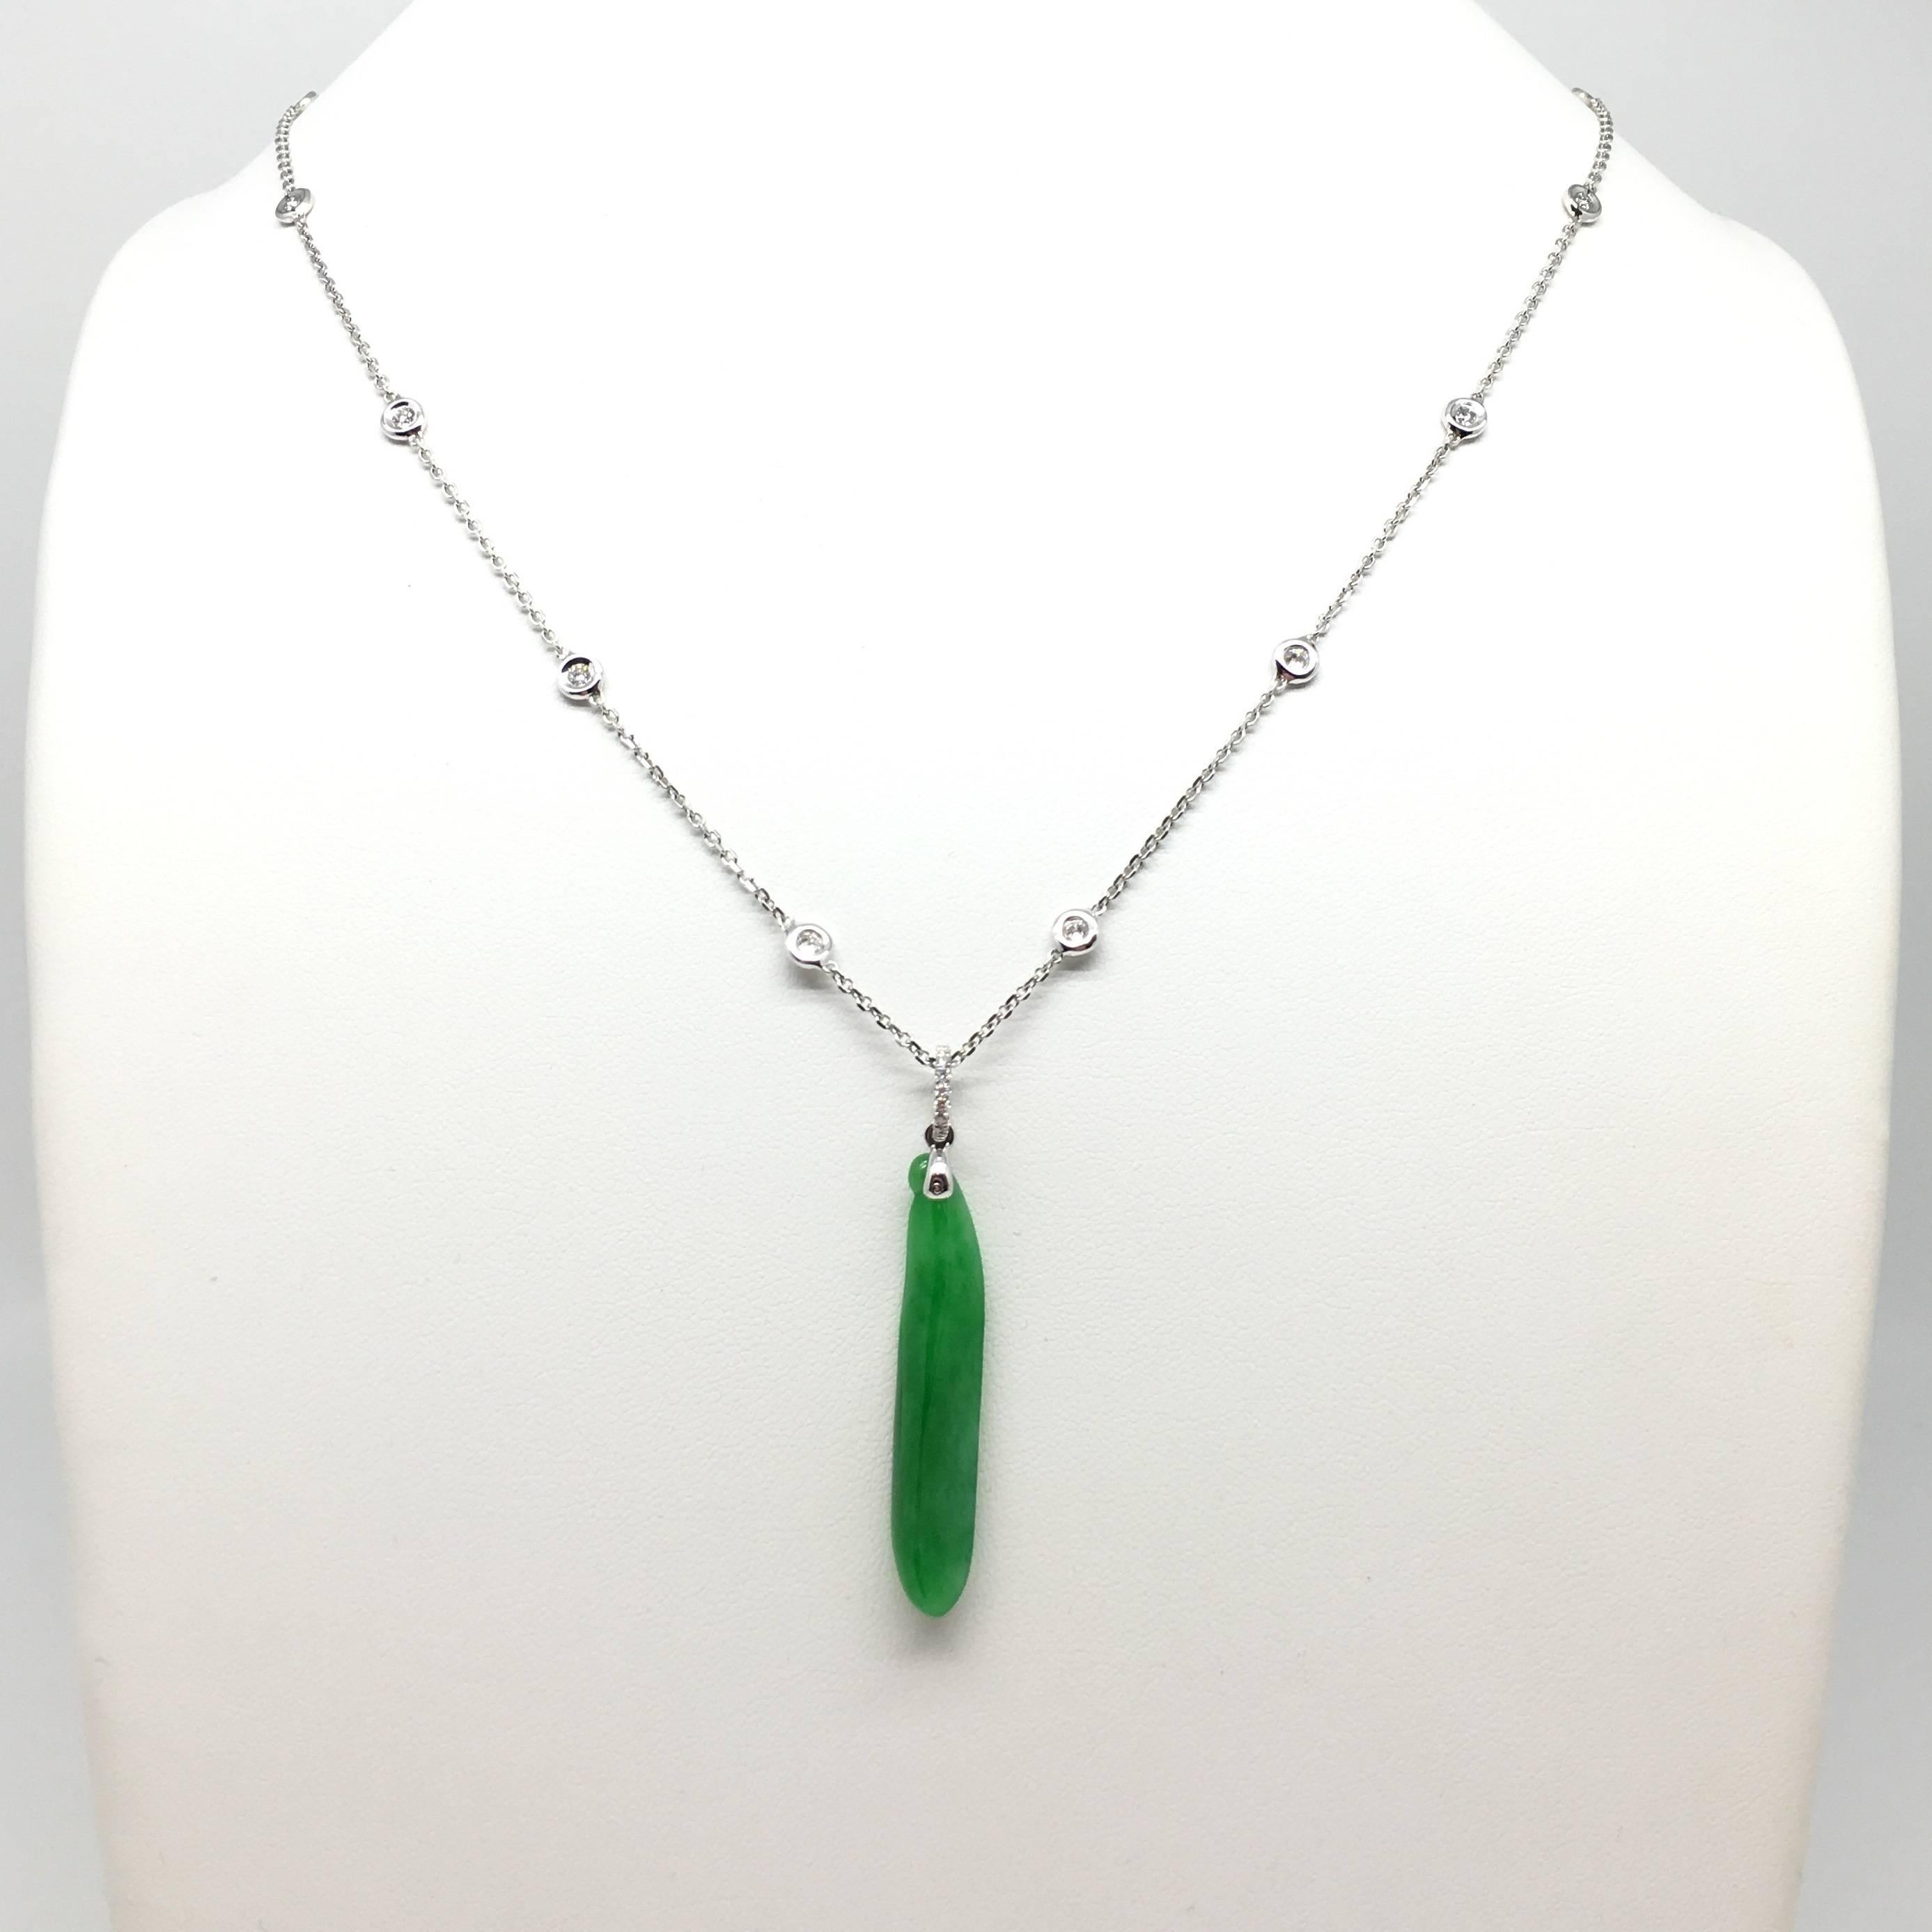 Natural Jadeite, is known as 'heavenly' and 'imperial' in the Chinese culture. Different shapes have different morals behind their carvings. Chinese people believed Jadeite brings good luck, good health or protection to the wearer.

This 9.76 carat